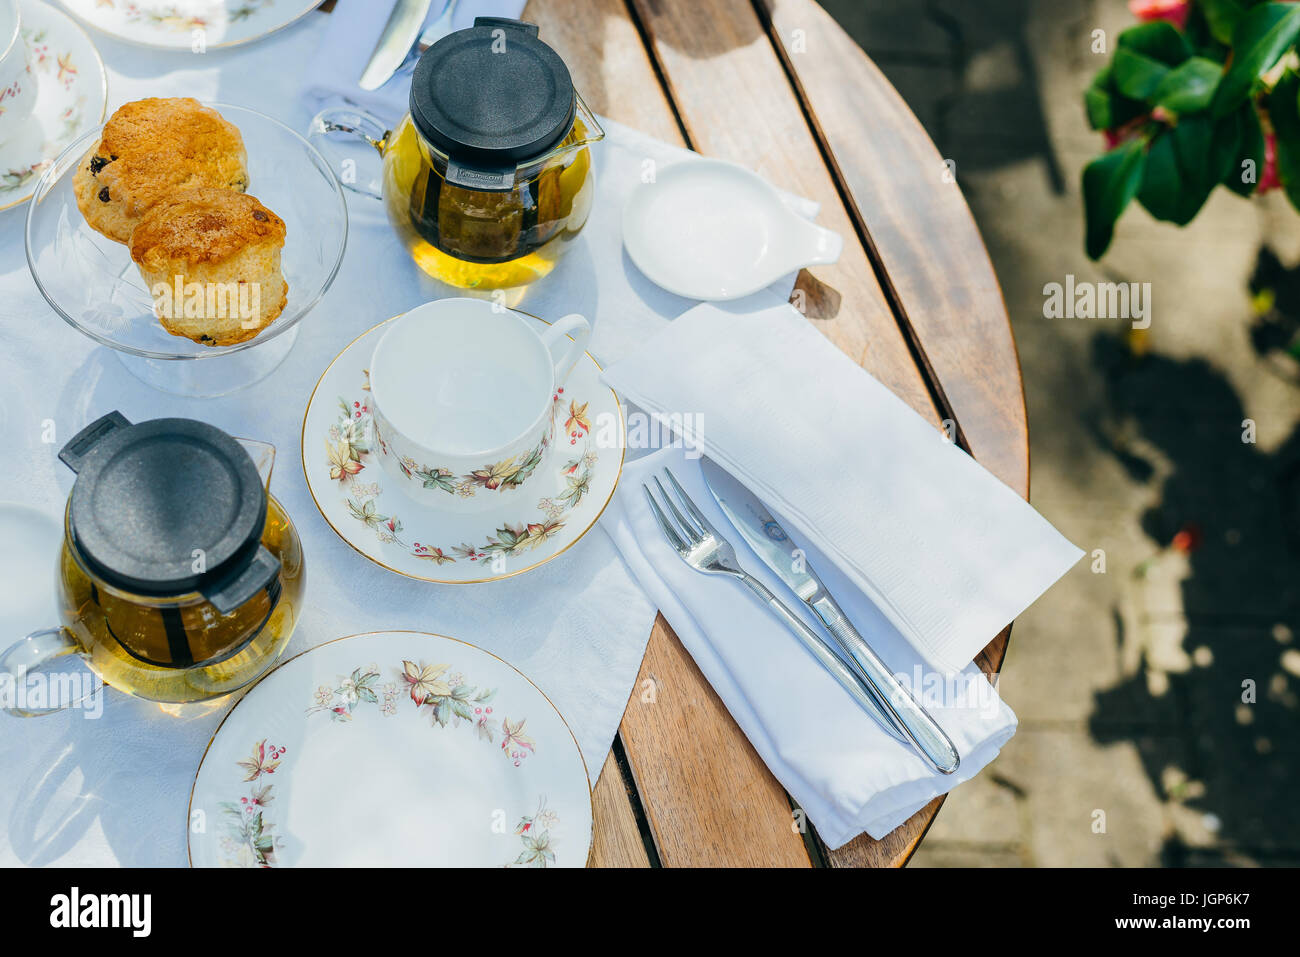 Plates, cups, scones, and tea for afternoon tea Stock Photo